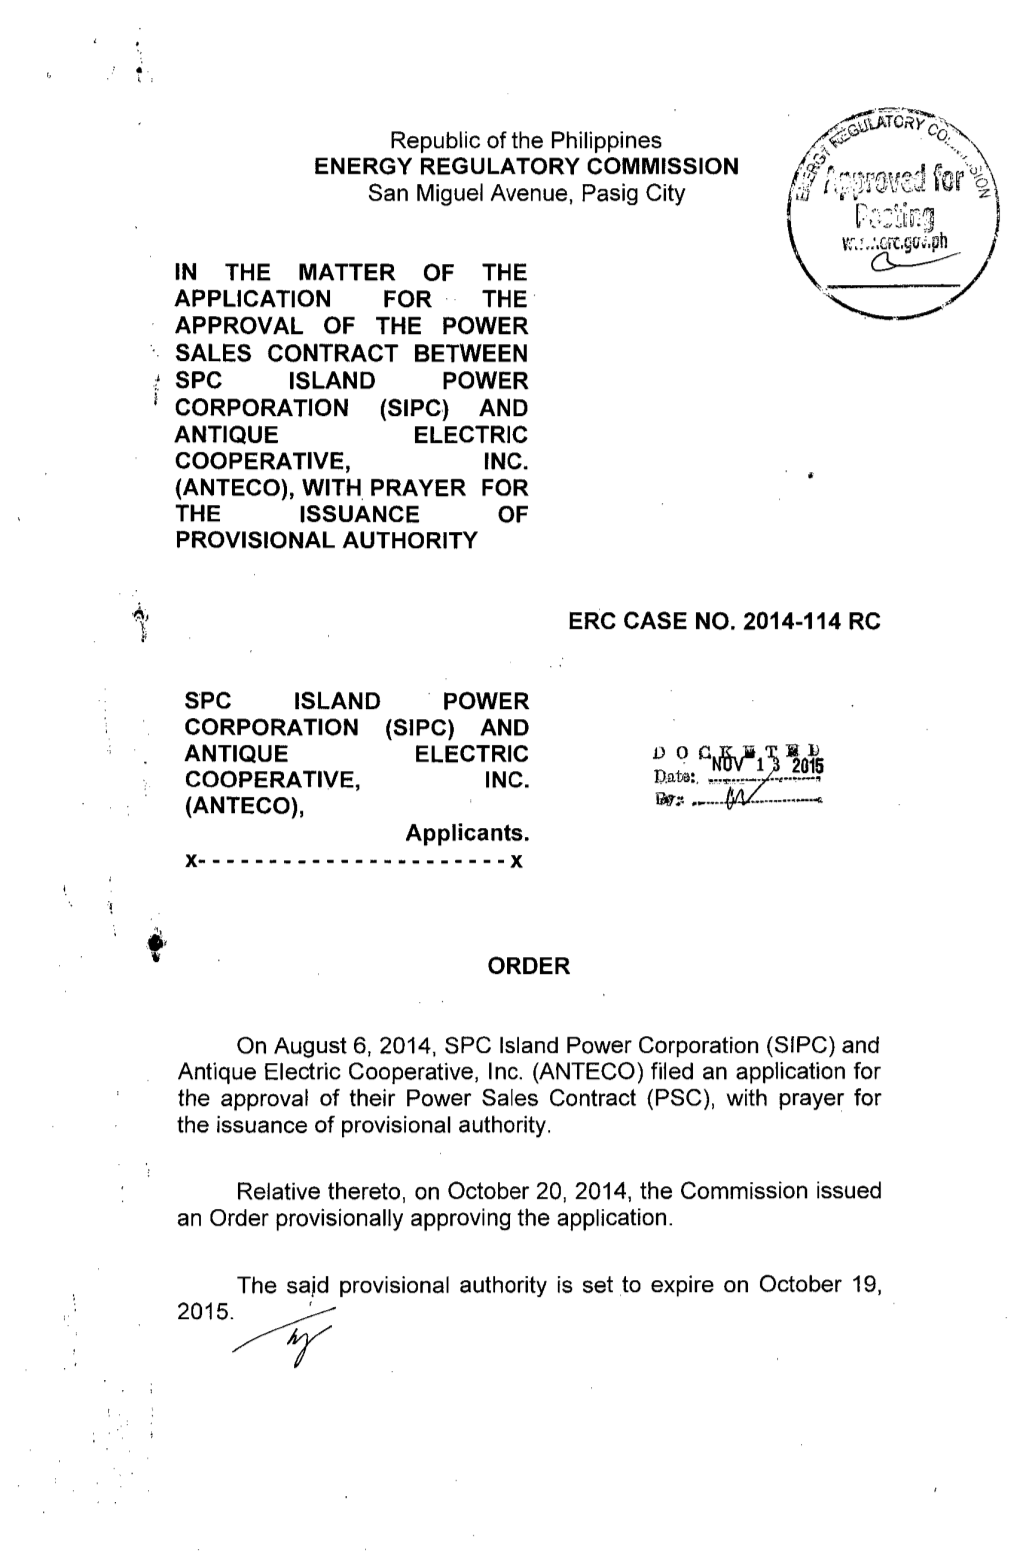 Toplsipc and ANTECO Psa ~-Eac·- ' OJ]Lce of the Chairman ERC CASE NO